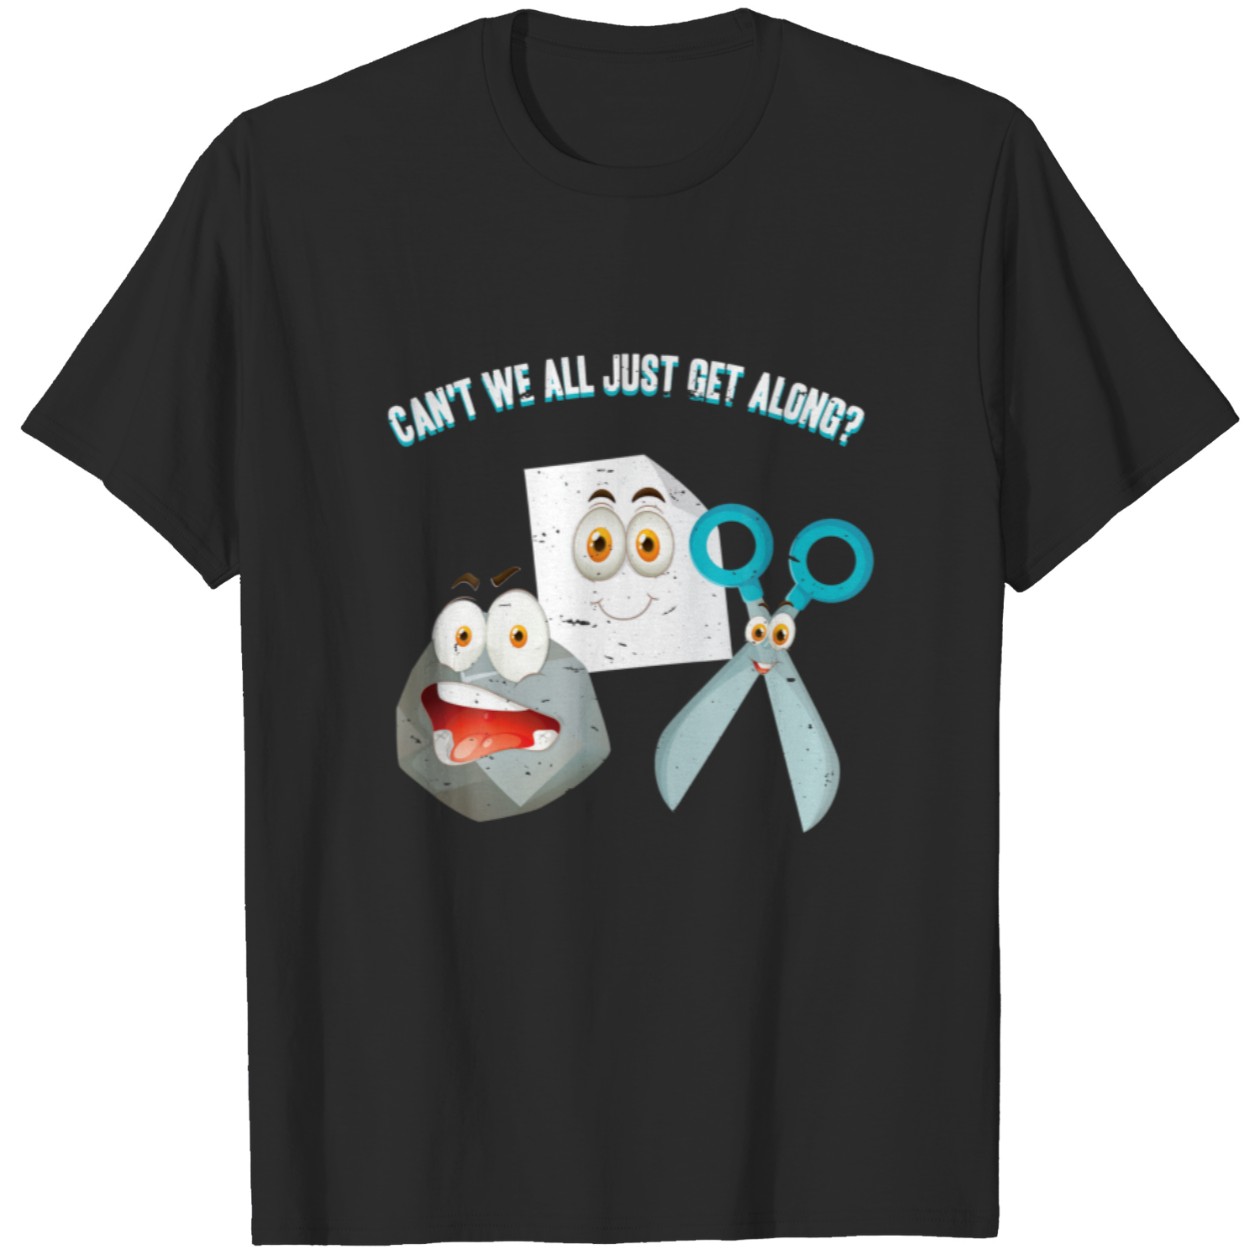 Cant-We-All-Just-Get-Along-Rock-Paper-Scissors-Tshirt-66378270